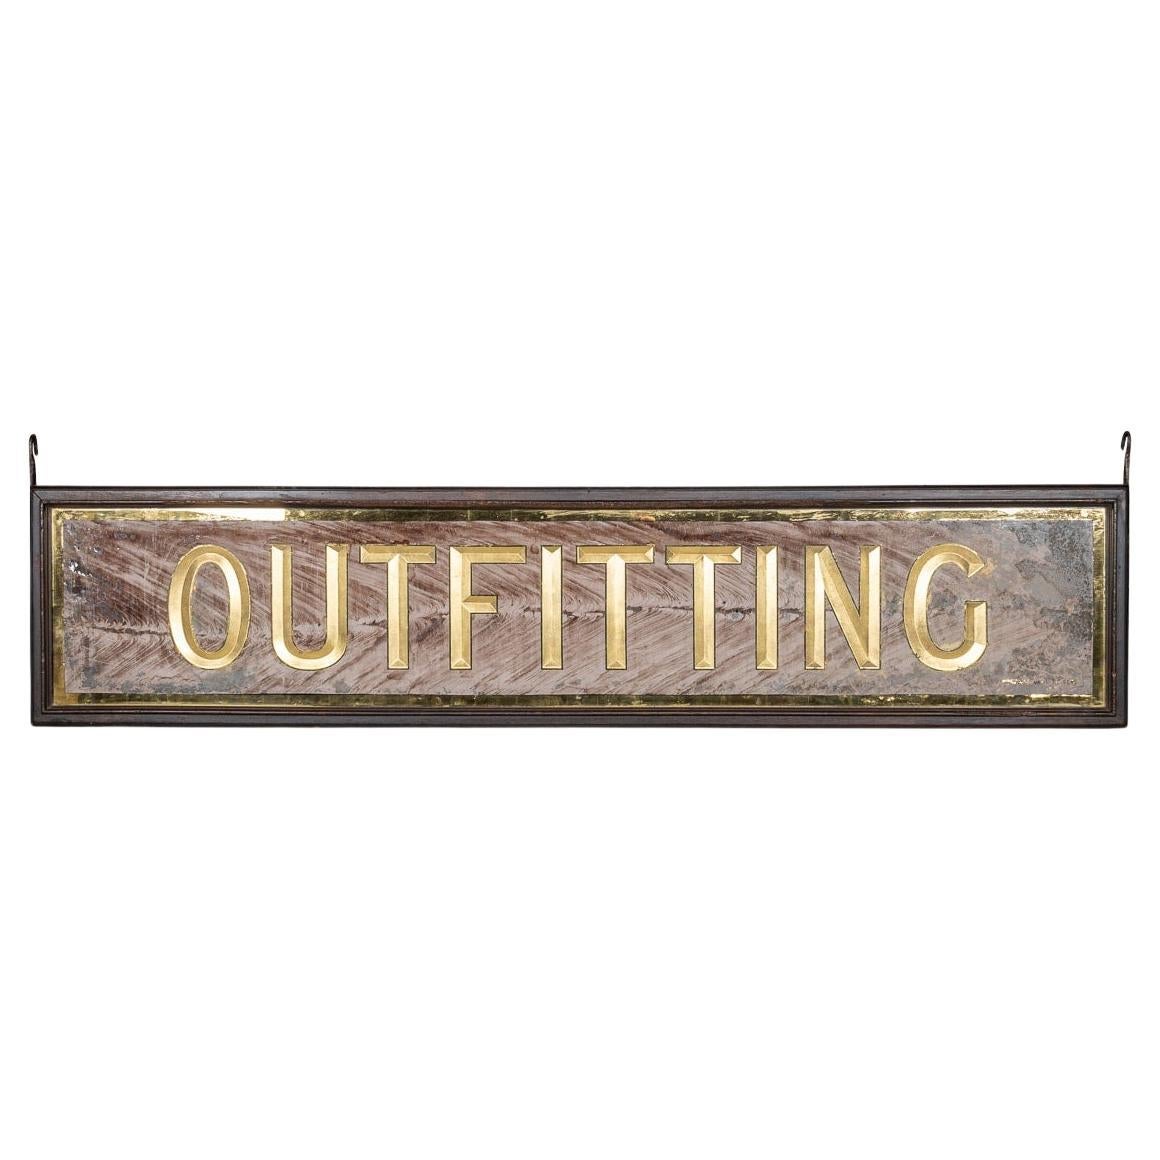 Antique 20th Century Victorian Mirrored Outfitting Sign For Harris Tweed c.1900 For Sale